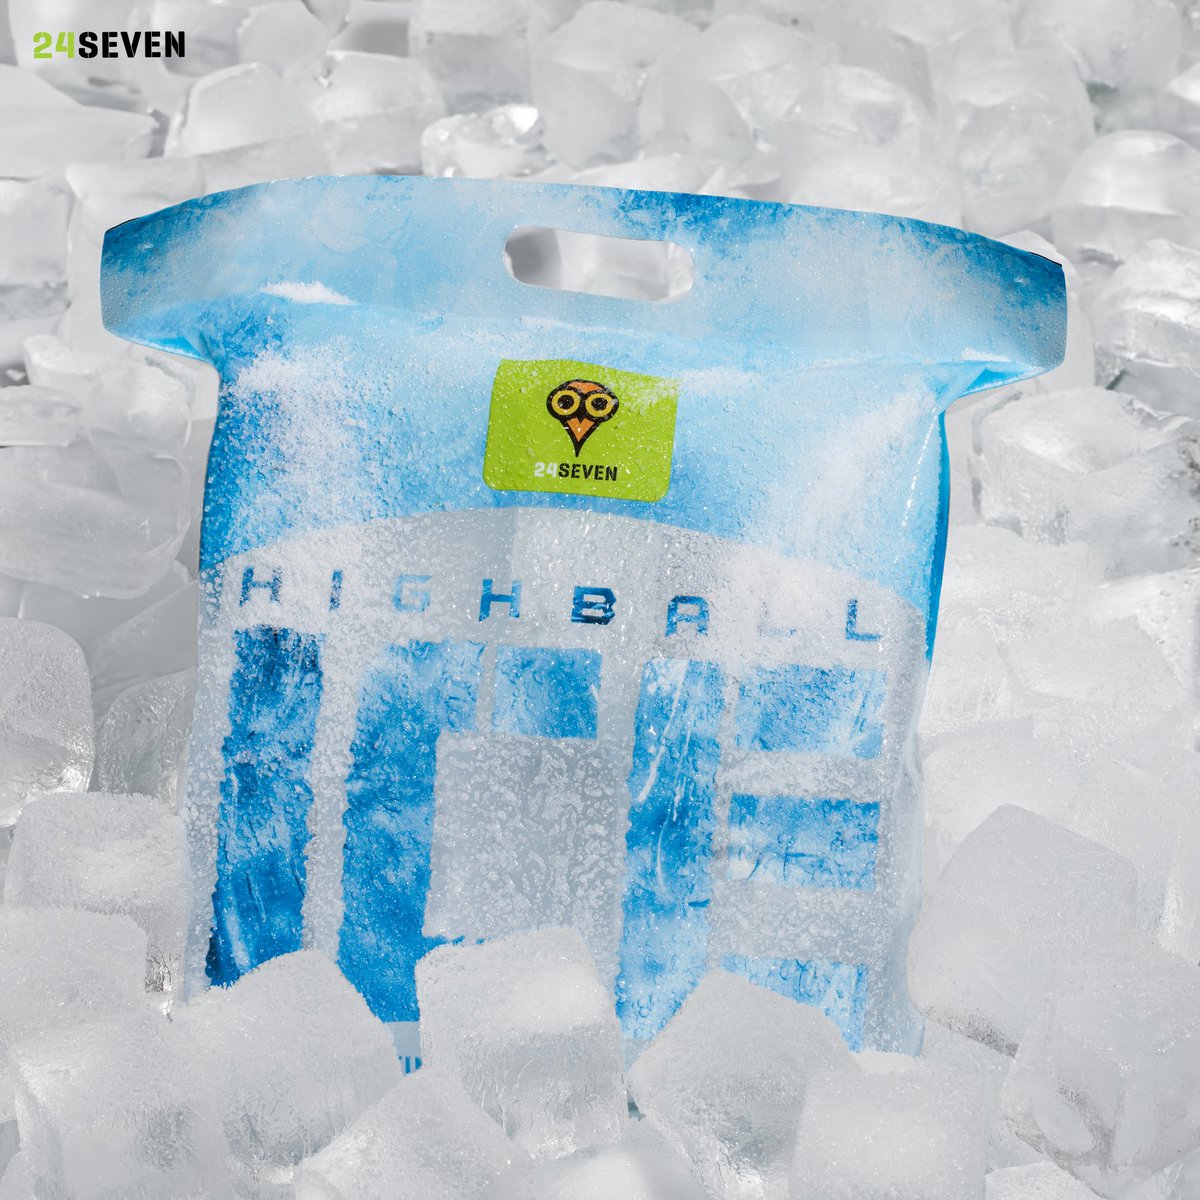 Stay frosty this summer with 24Seven's Highball Ice - essential for every party and perfect for keeping your sips (and yourself) cool! 😉
.
.
.
#24Seven #24Sevenin #Essentials #PartyEssentials #Summers #SummerEssentials #Ice #HighBallIce #HighBall #Drinks #Beverages #Visit24Seven